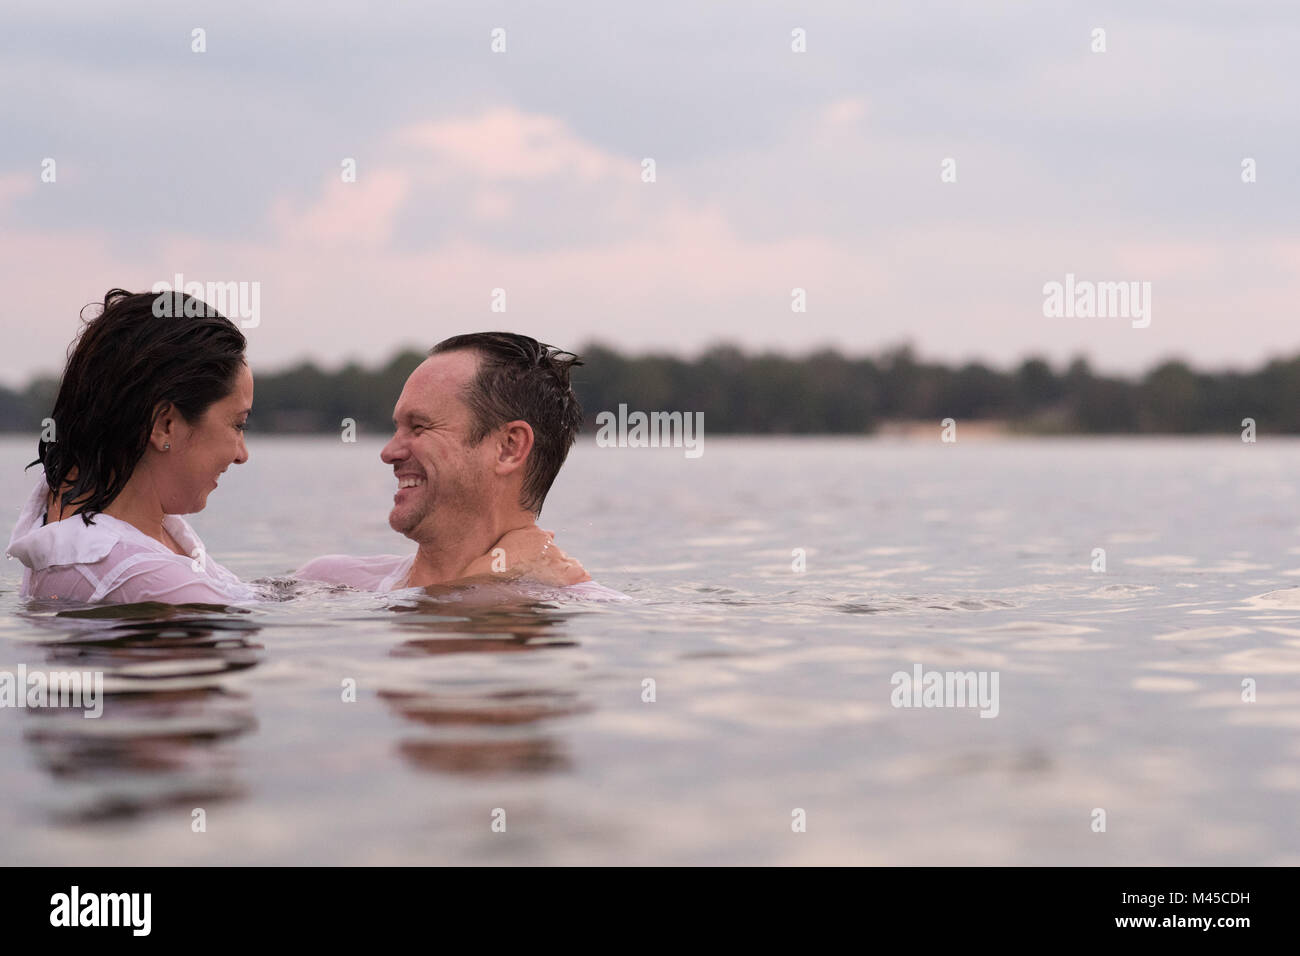 Clothed couple in water, Destin, Florida, United States, North America Stock Photo